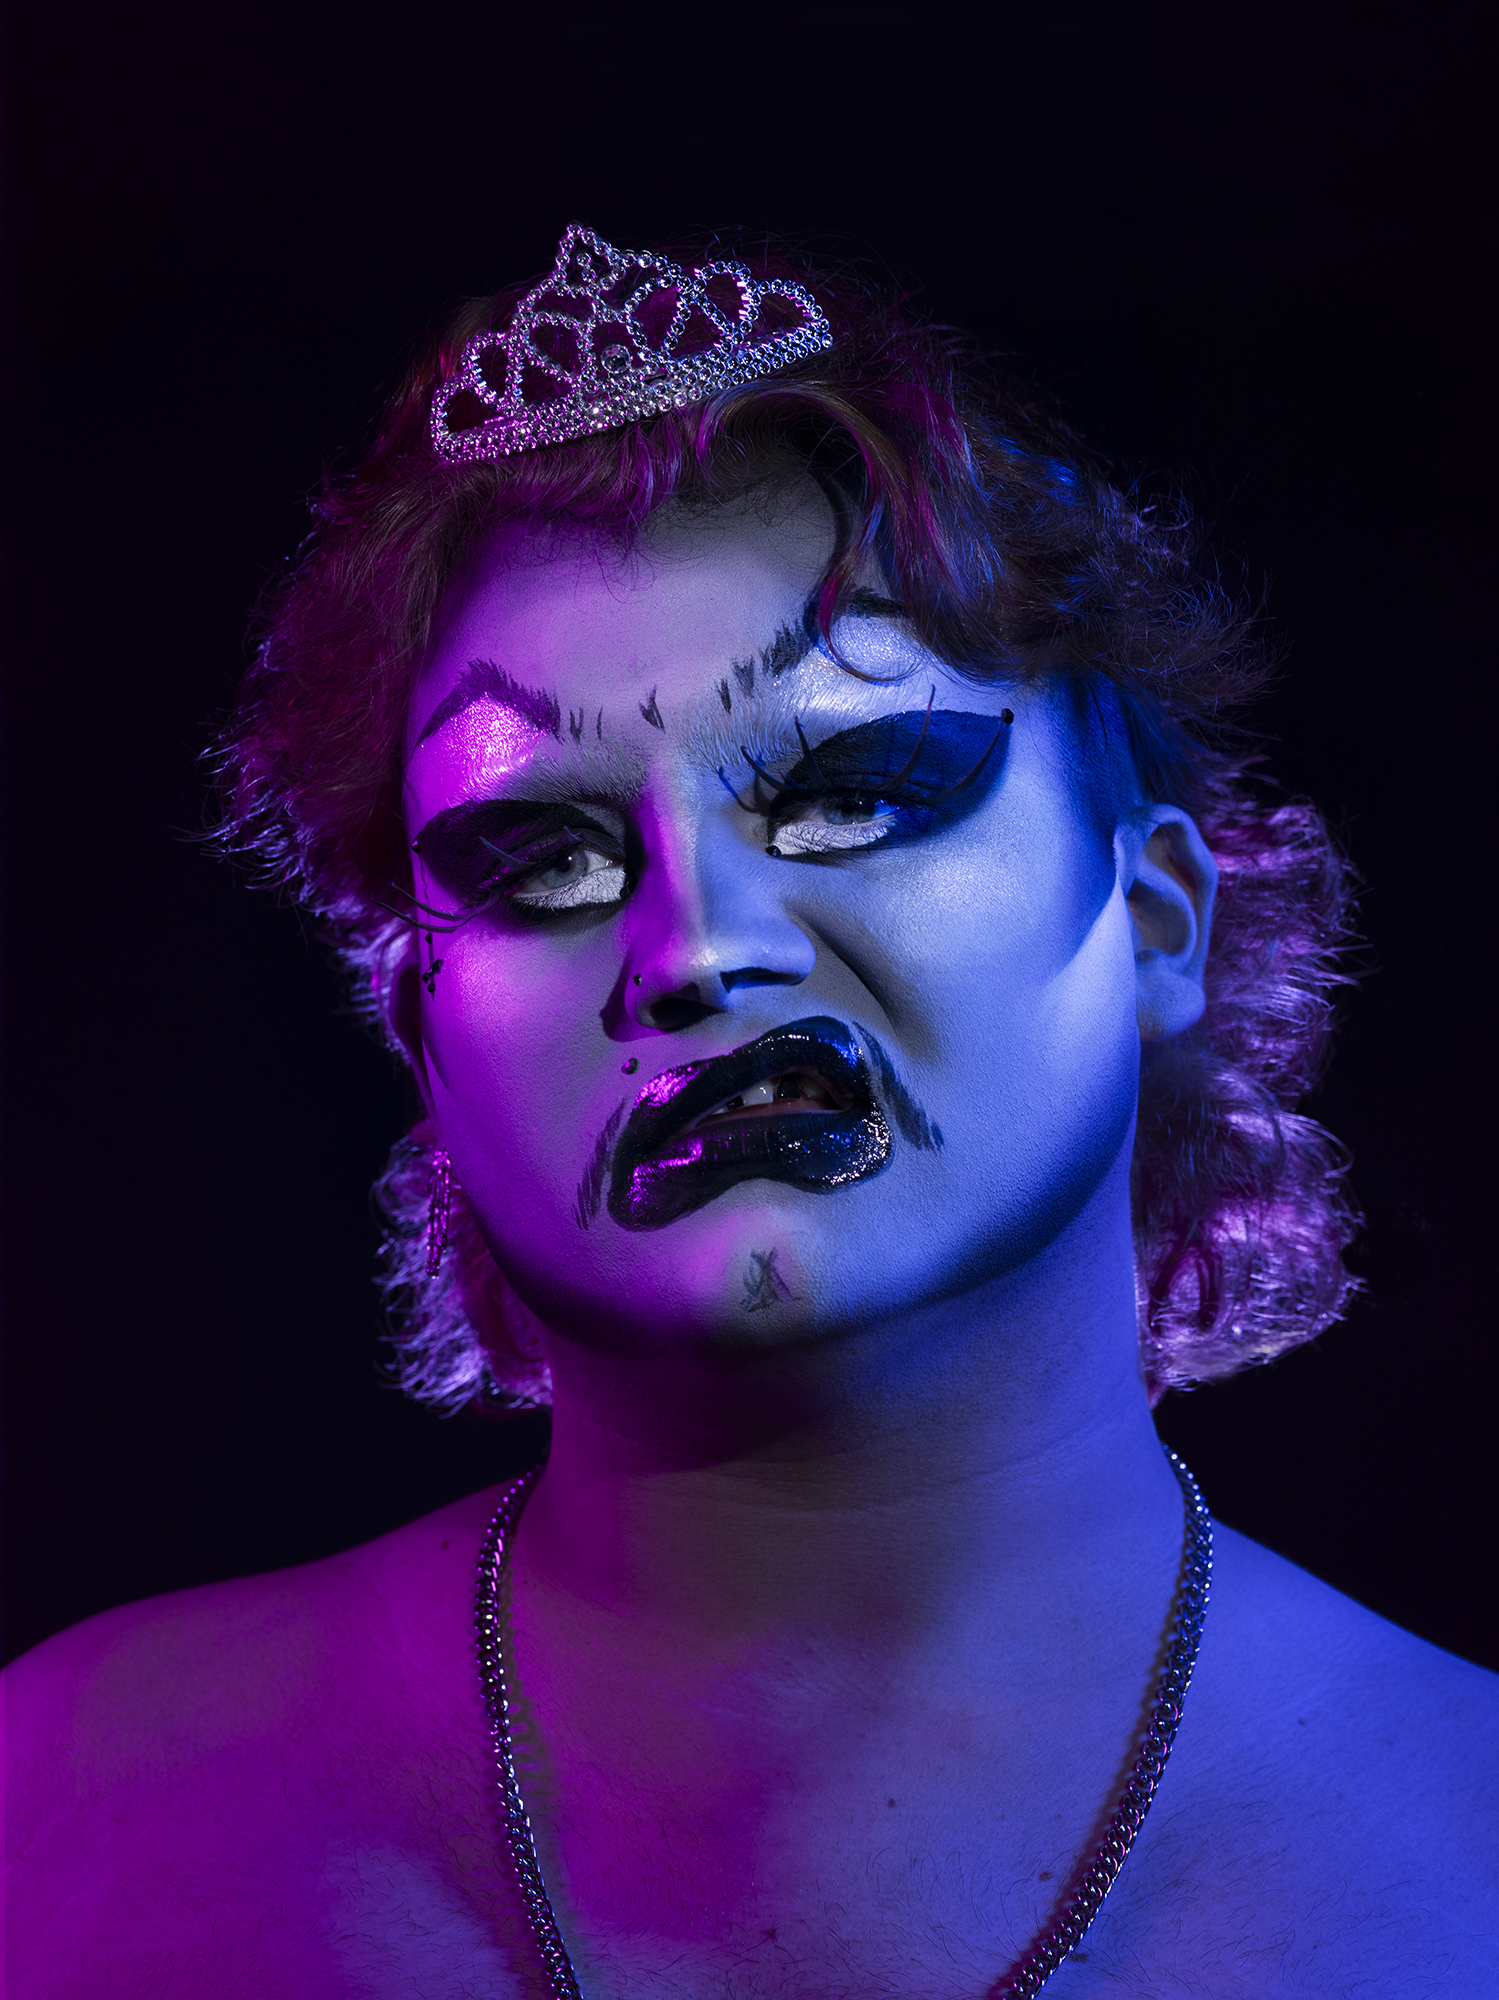 BA Photography work by Micha Hollis showing a portrait of drag artist Brat. The lighting is multi-coloured with pink on the left and blue on the right.